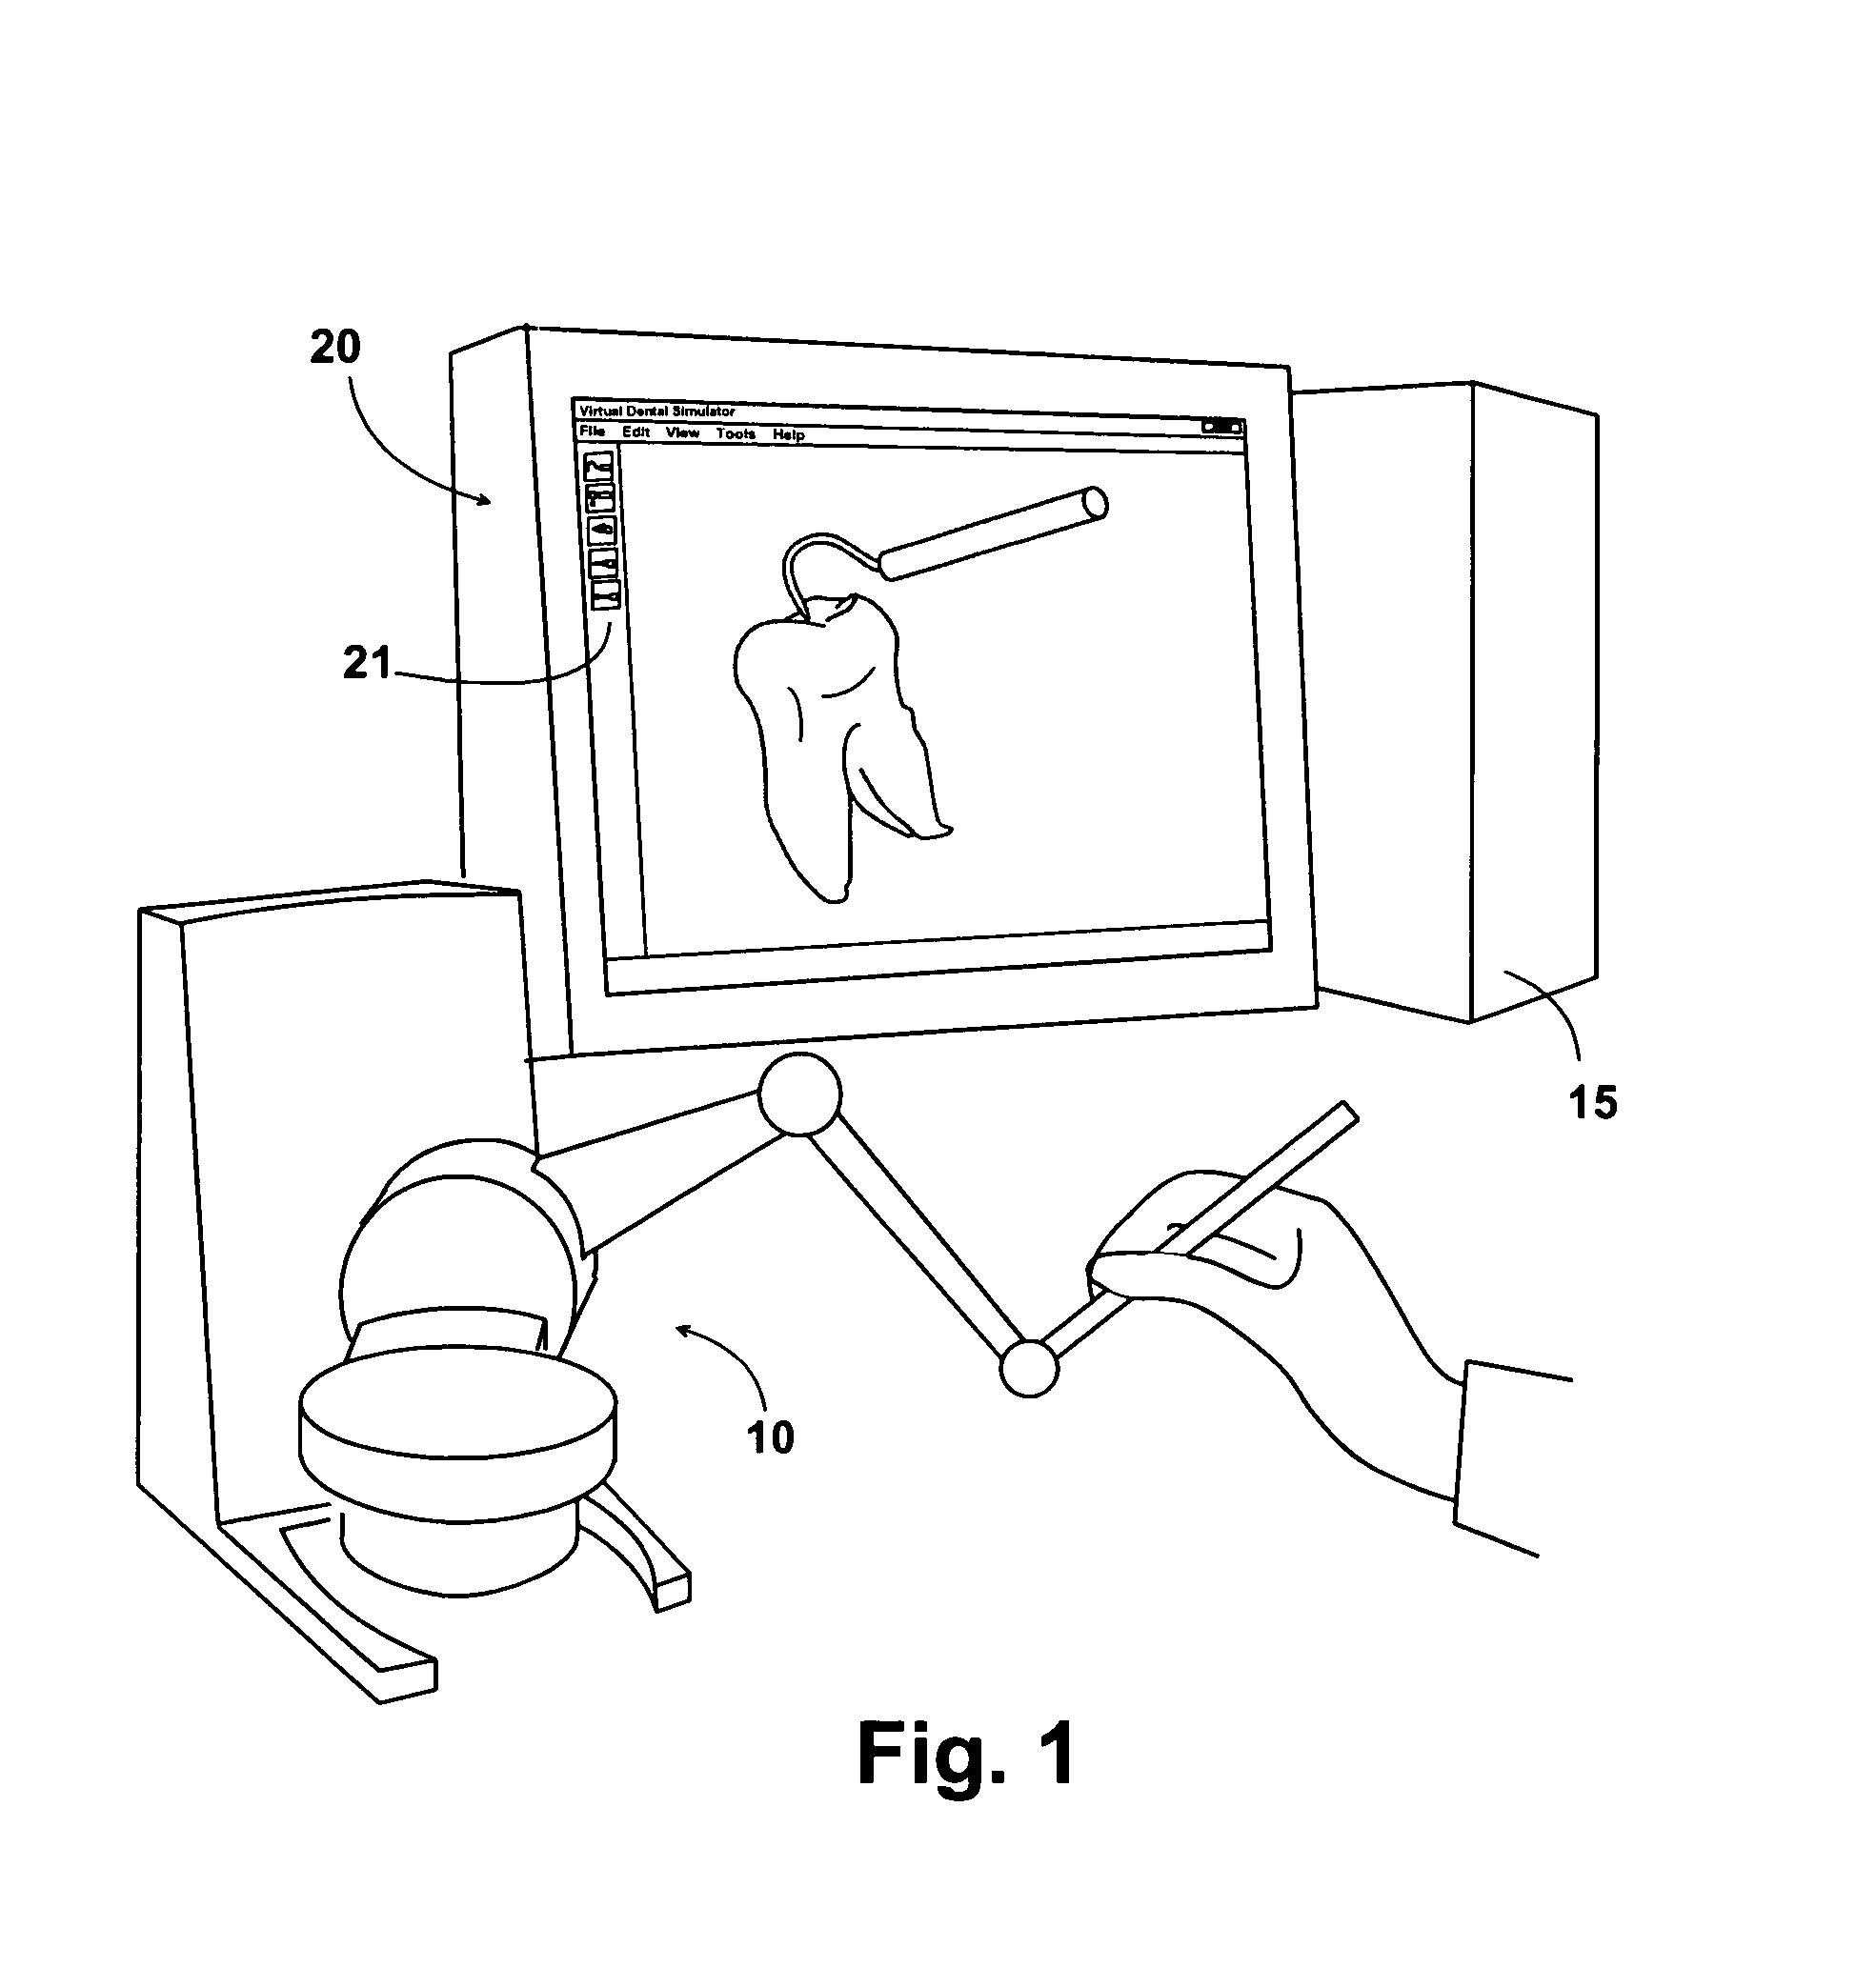 Methods and apparatus for simulating dental procedures and for training dental students